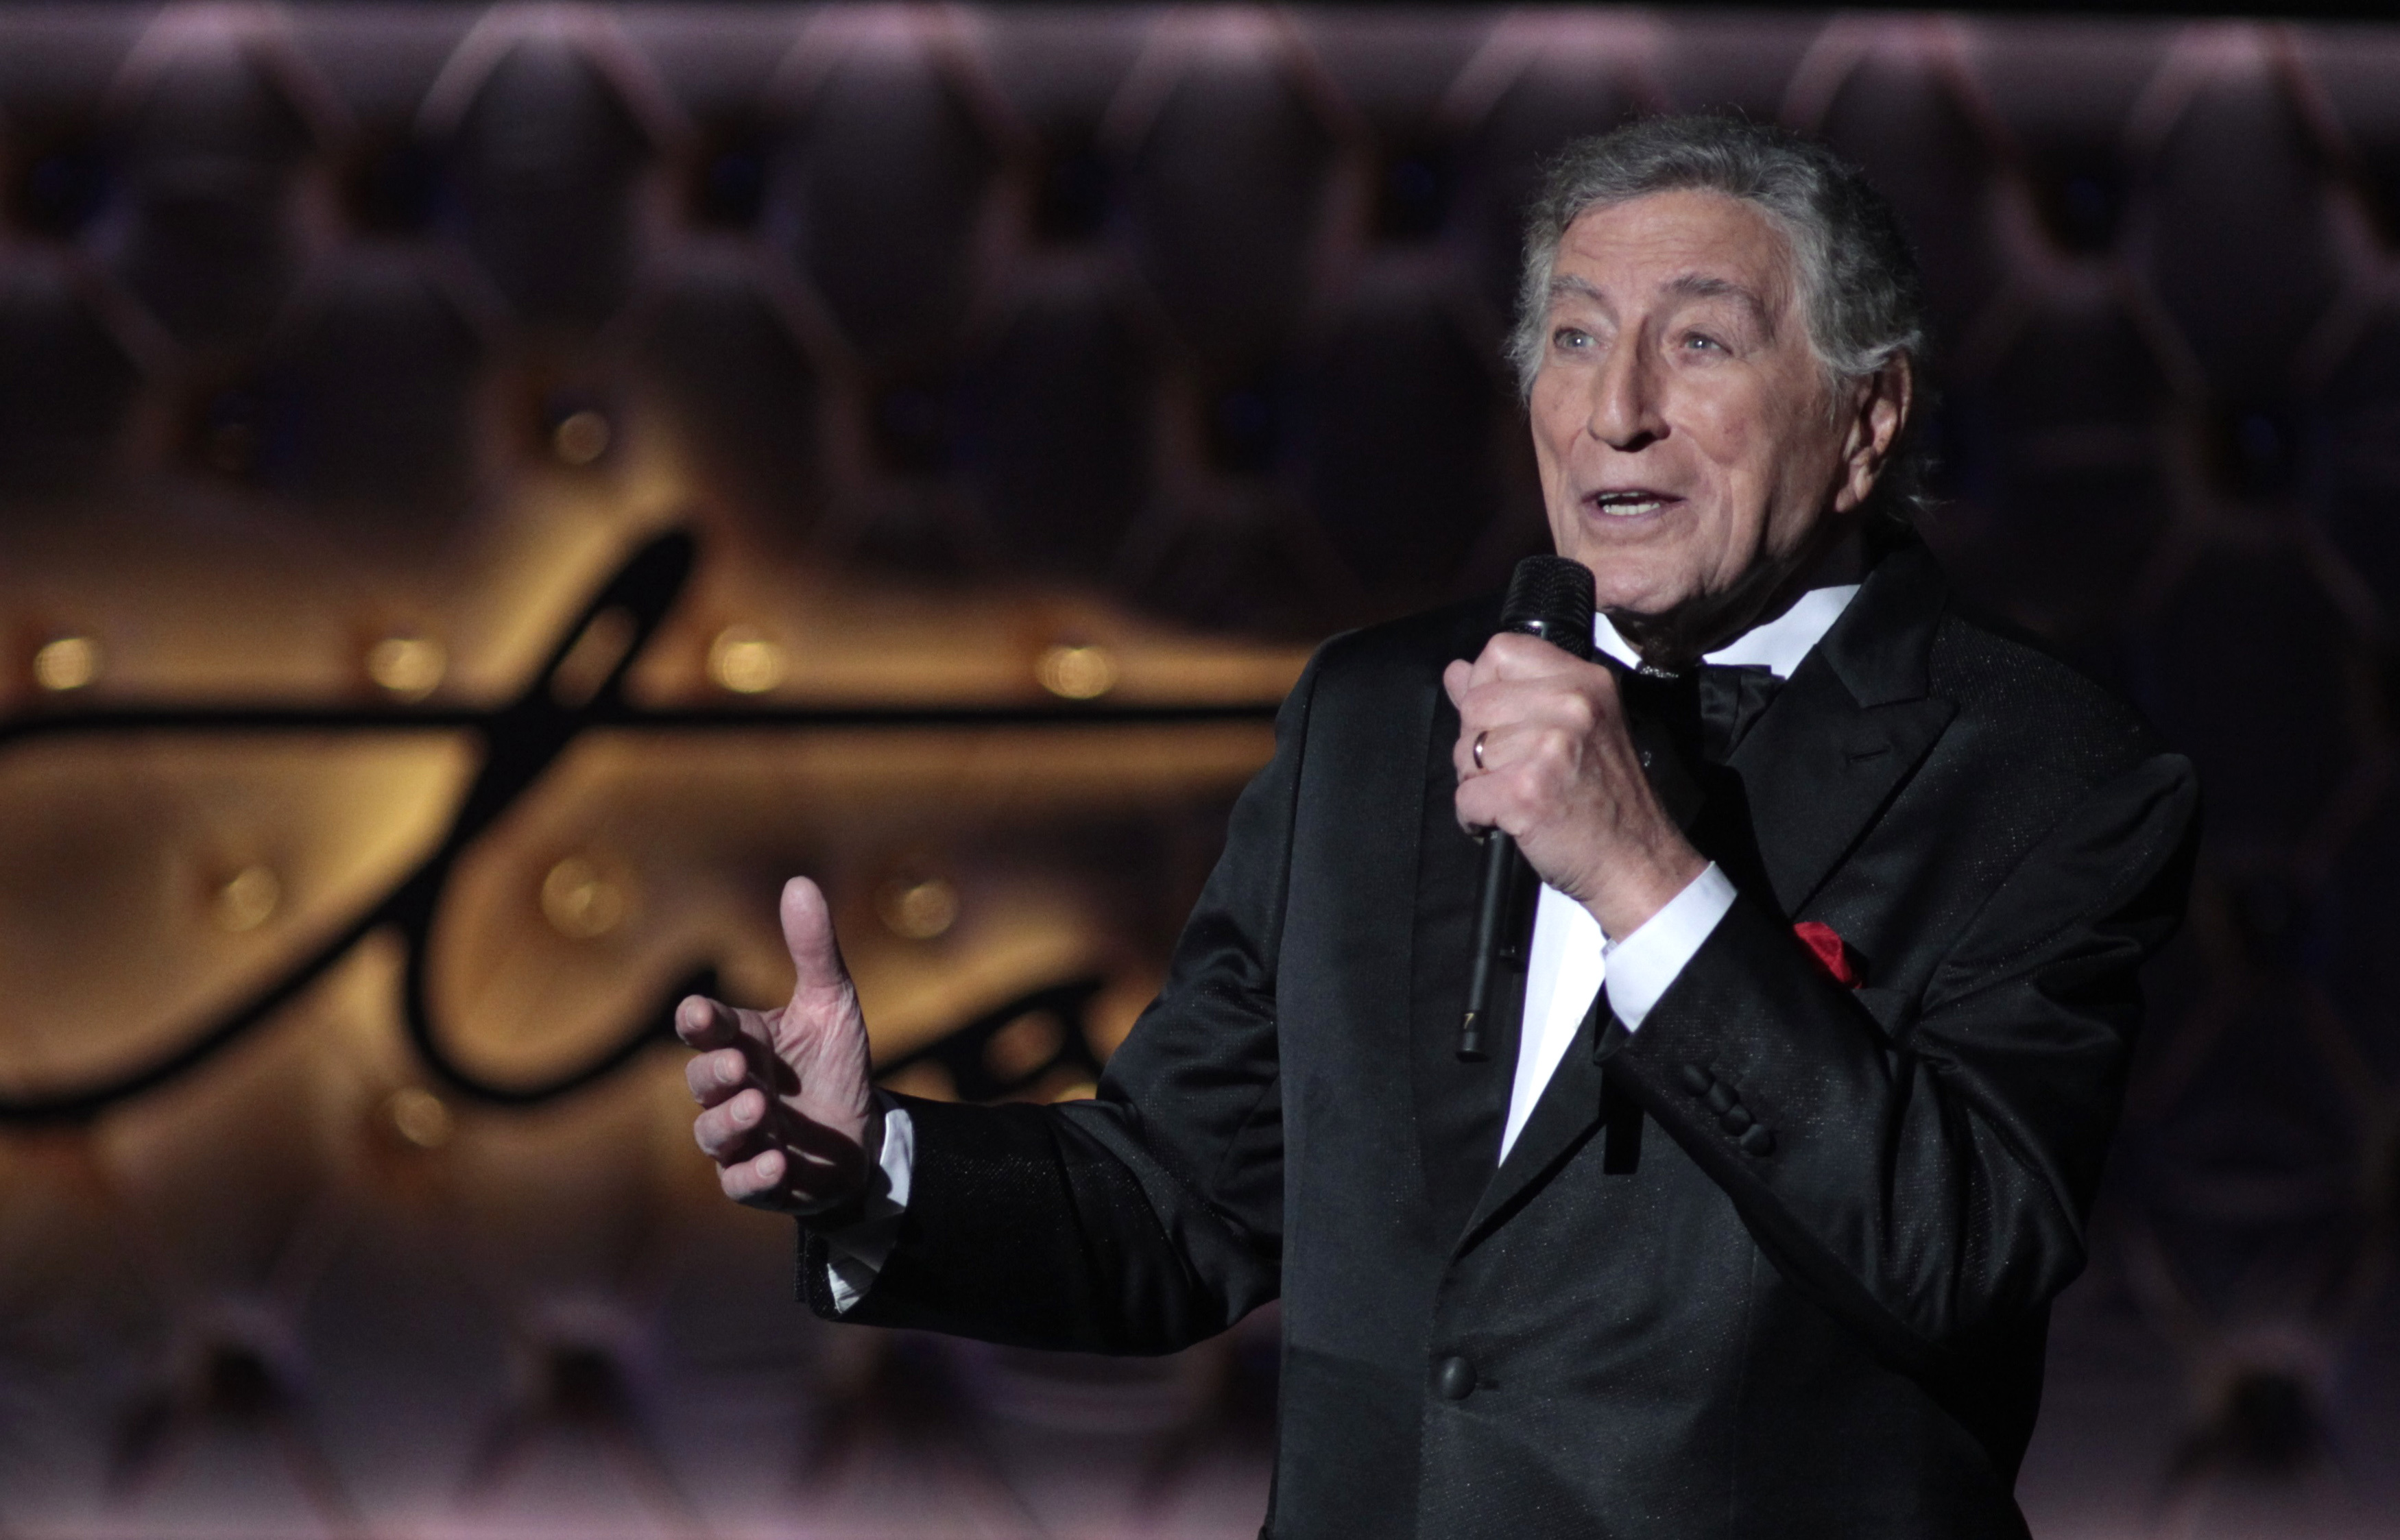 Tony Bennett, Masterful Stylist Of American Musical Standards, Dies At 96